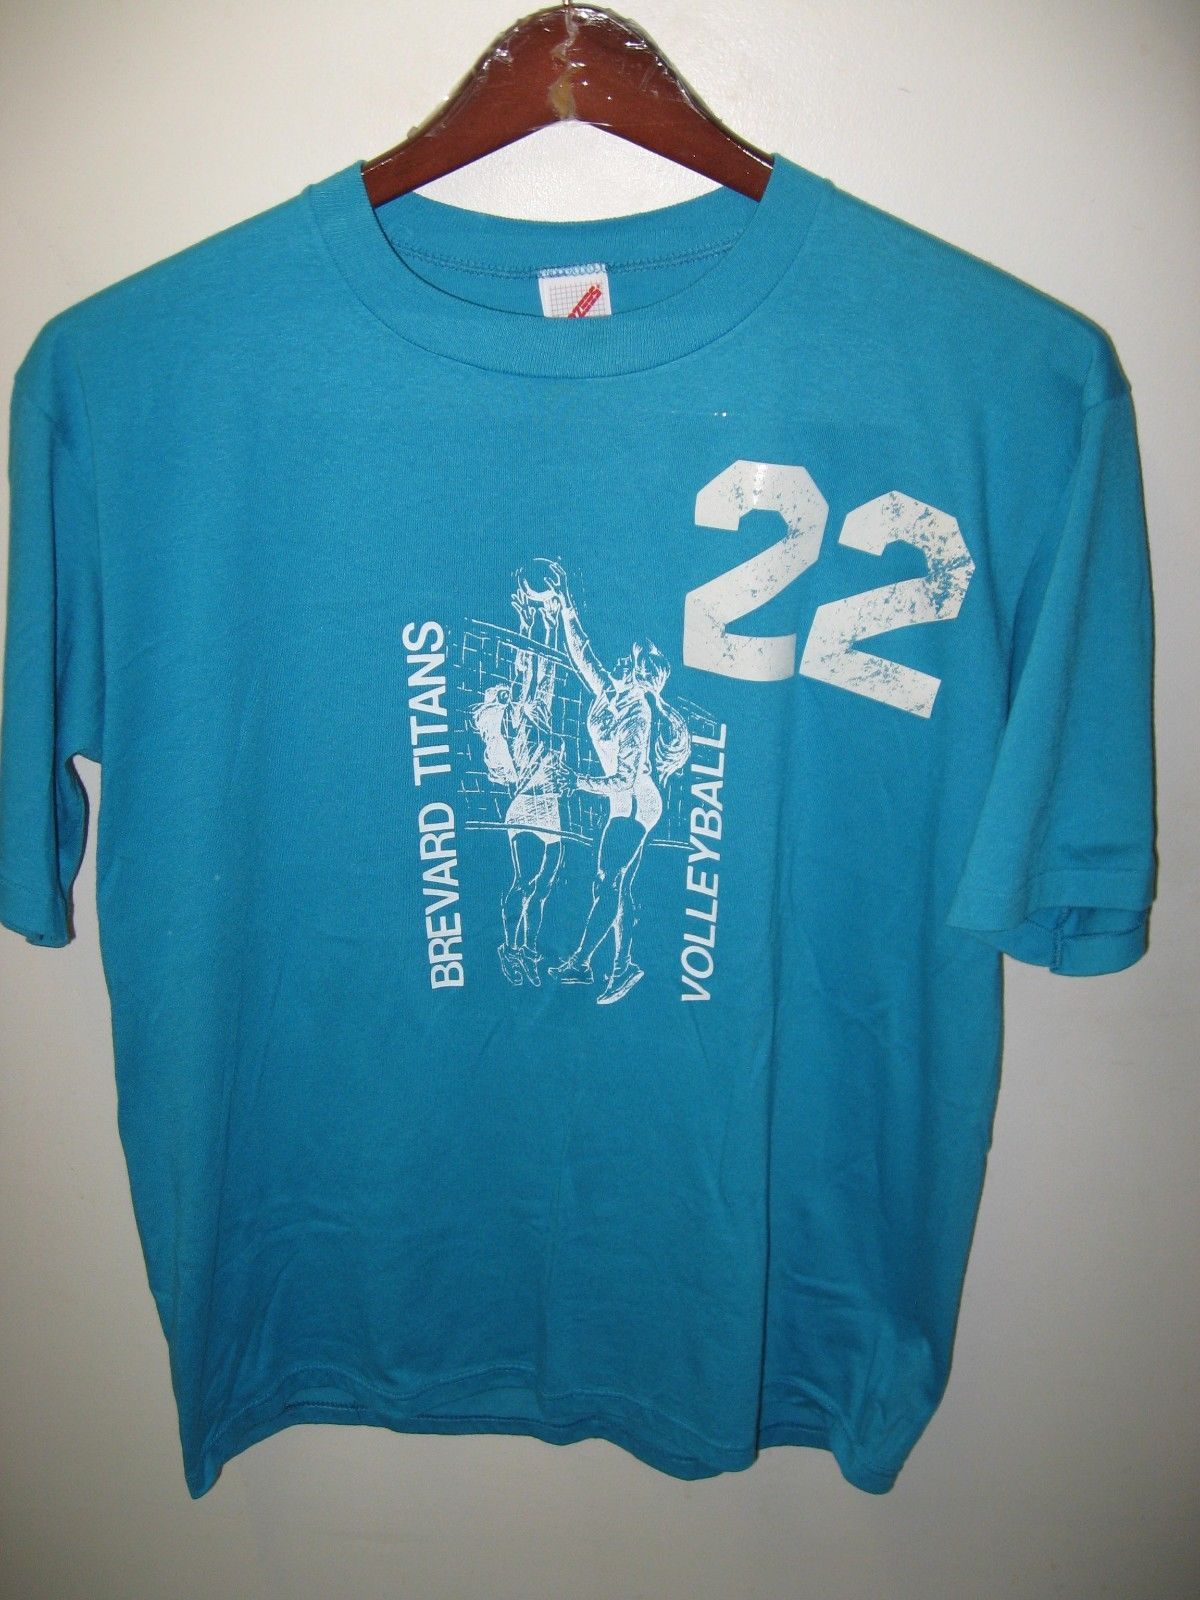 Brevard Community College Tee - Cocoa FL Vintage 1980's Volleyball T ...